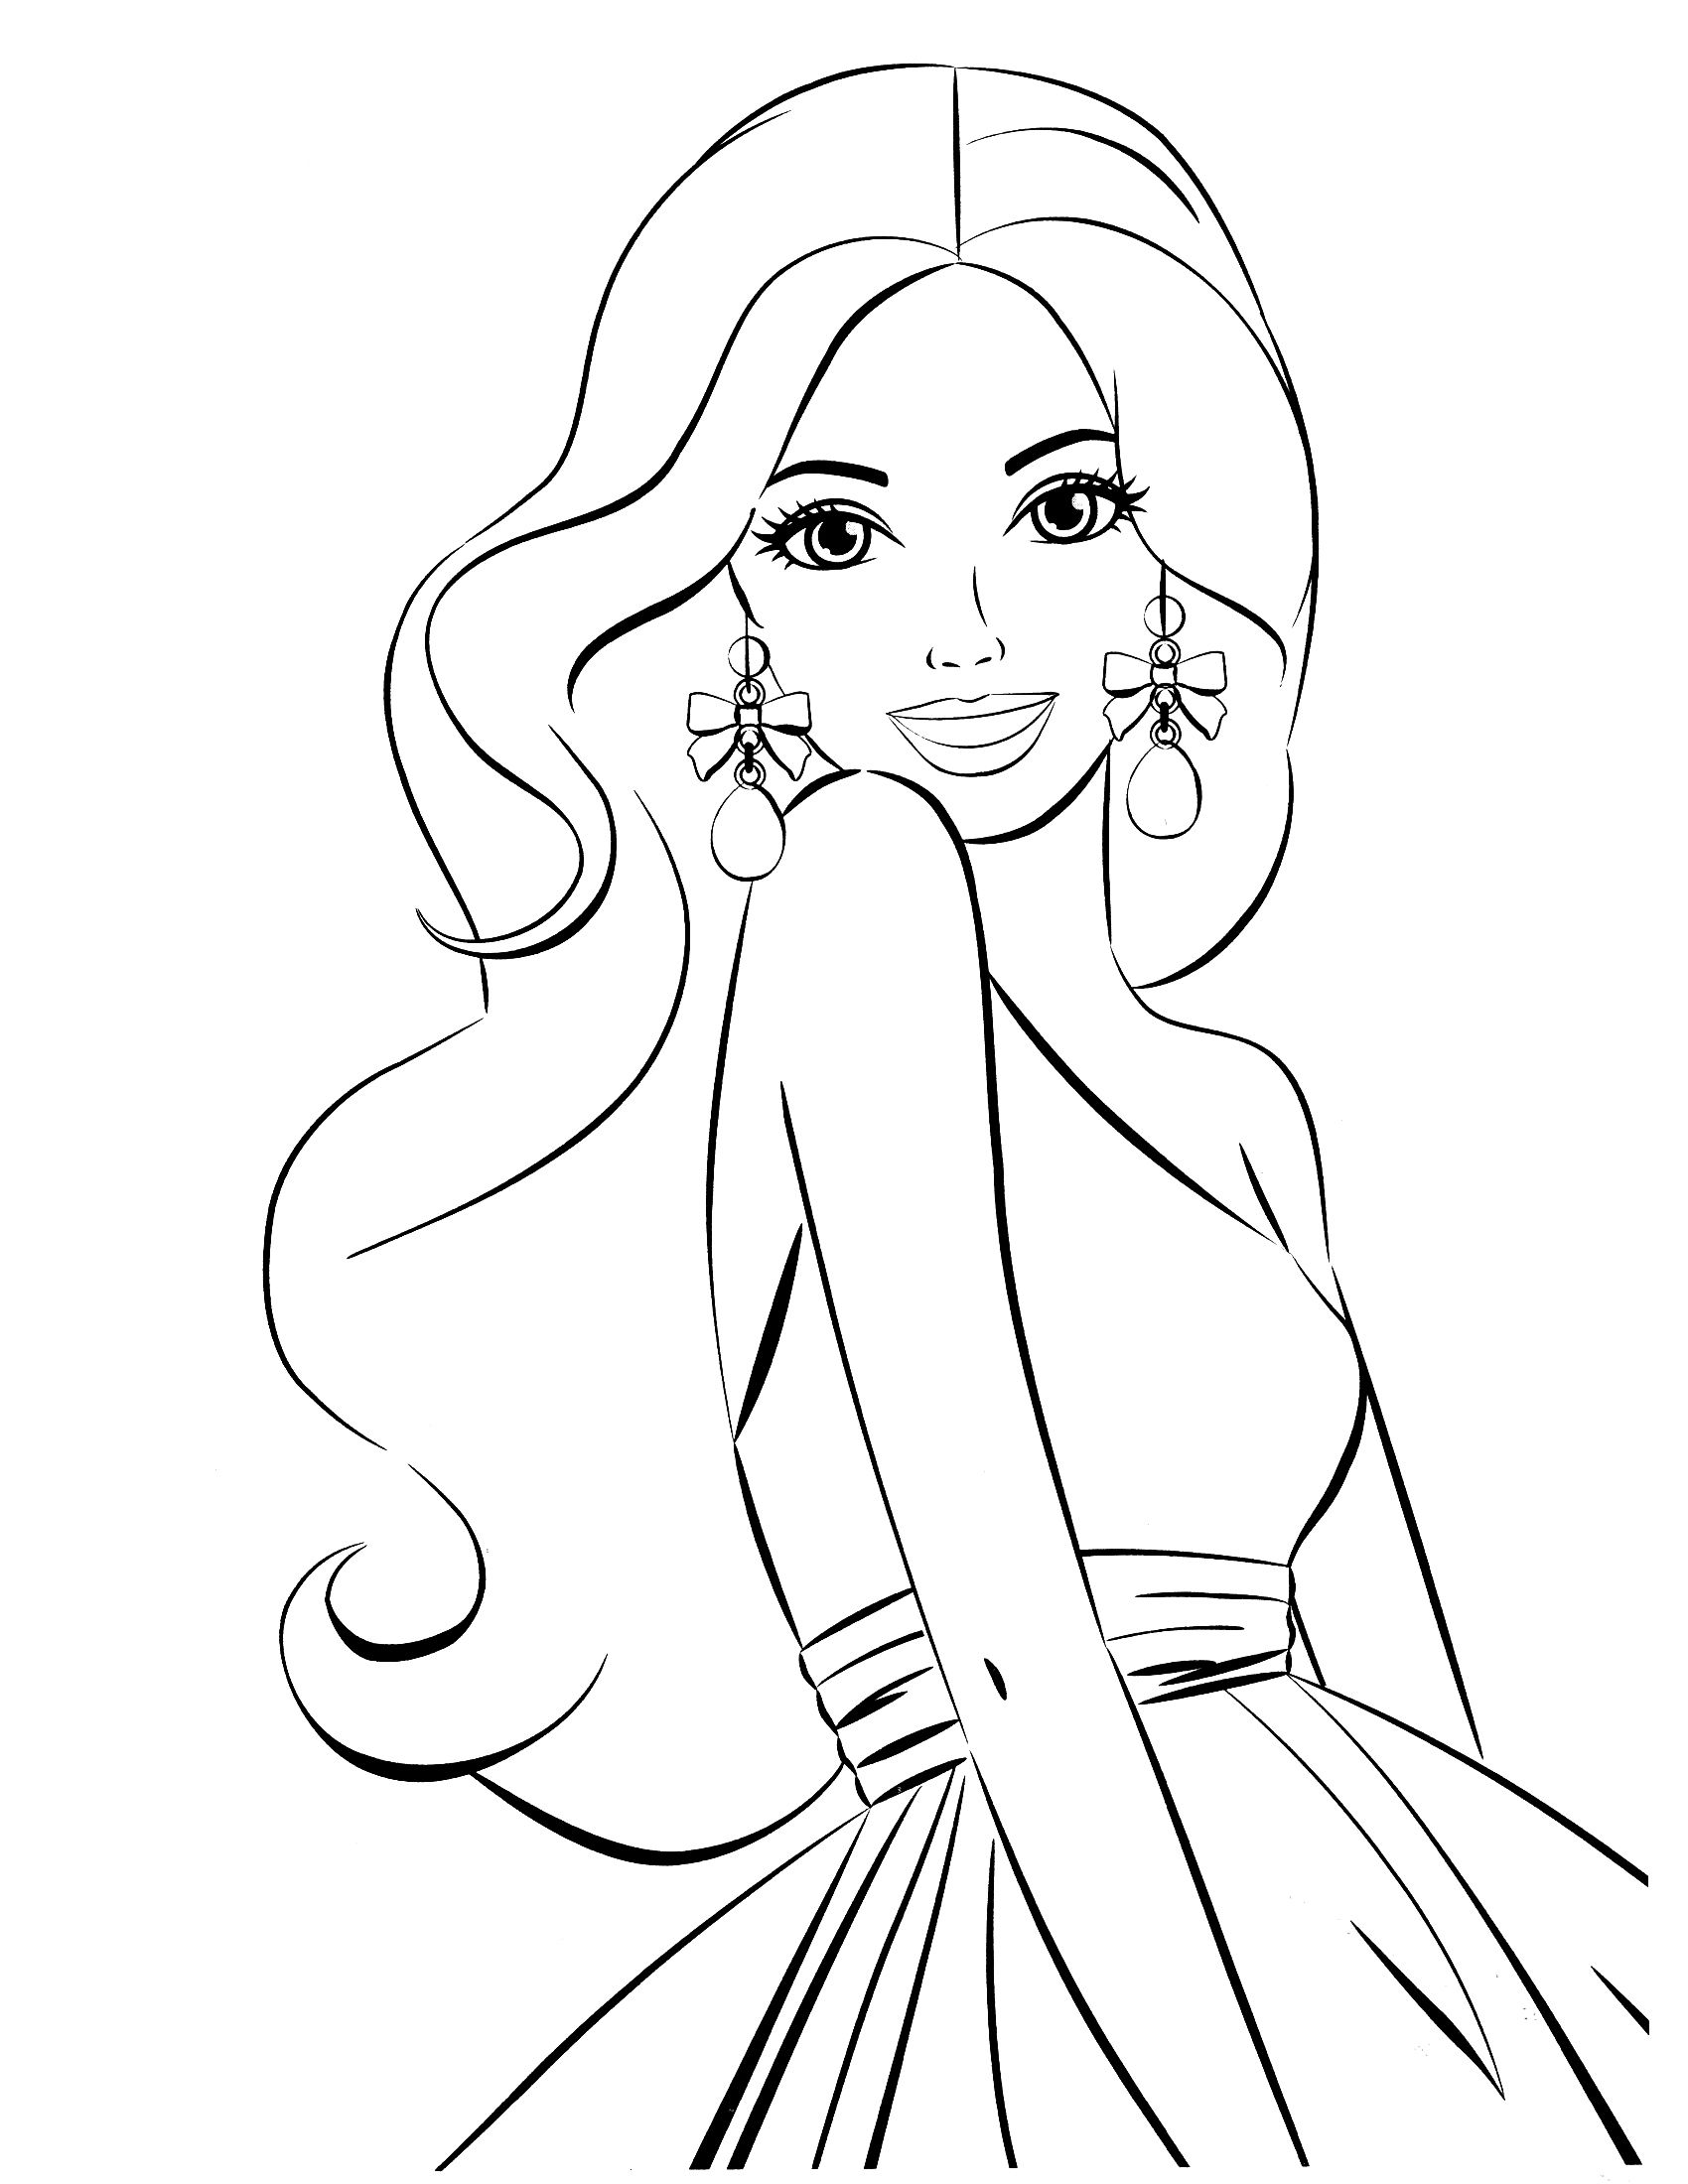 Barbie coloring page.